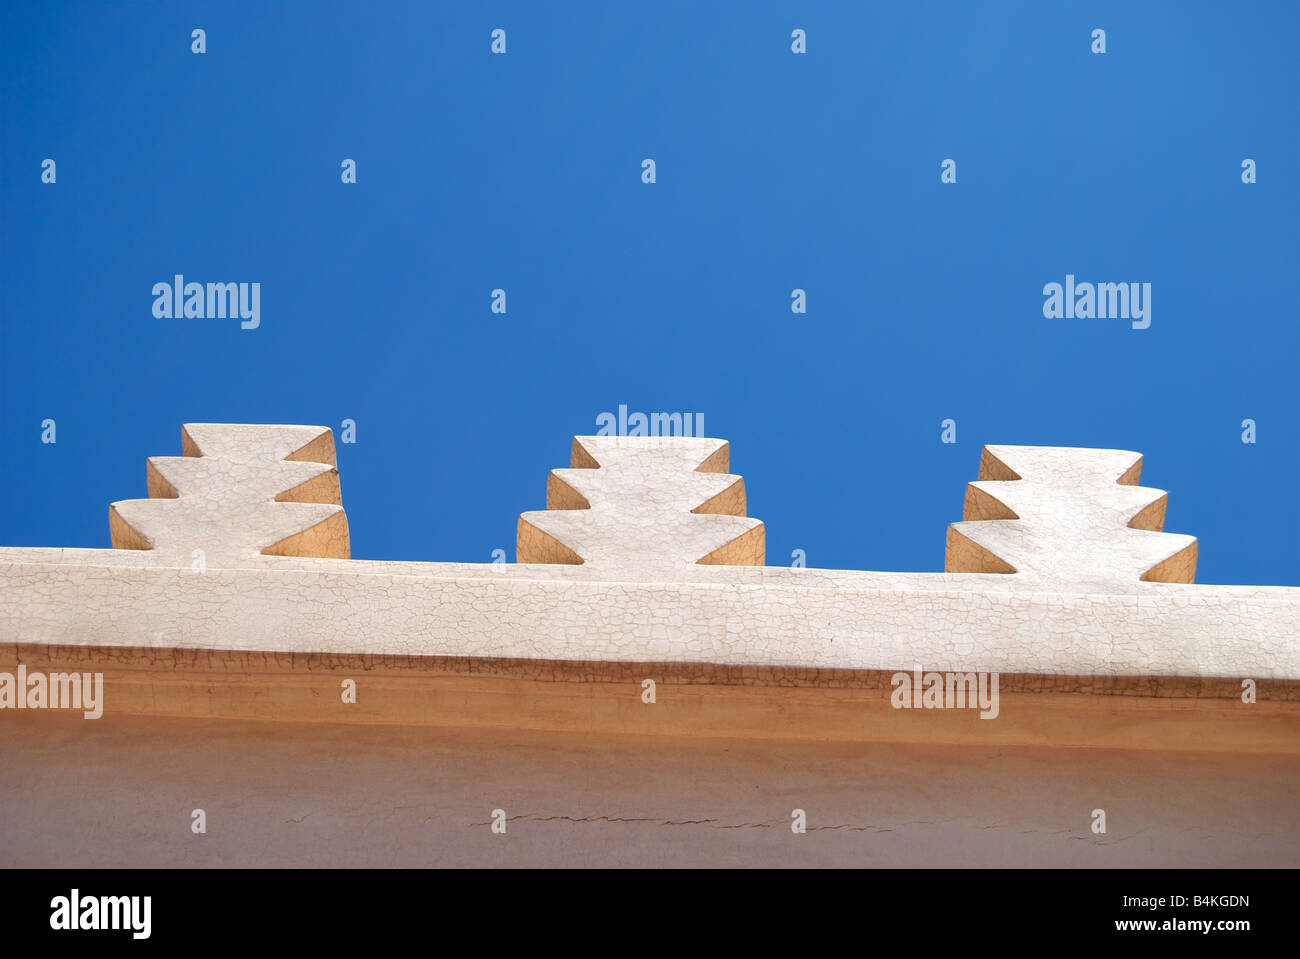 Decorative architecture feature of a building against a perfectly blue sky in Marrakech, Morocco. Stock Photo